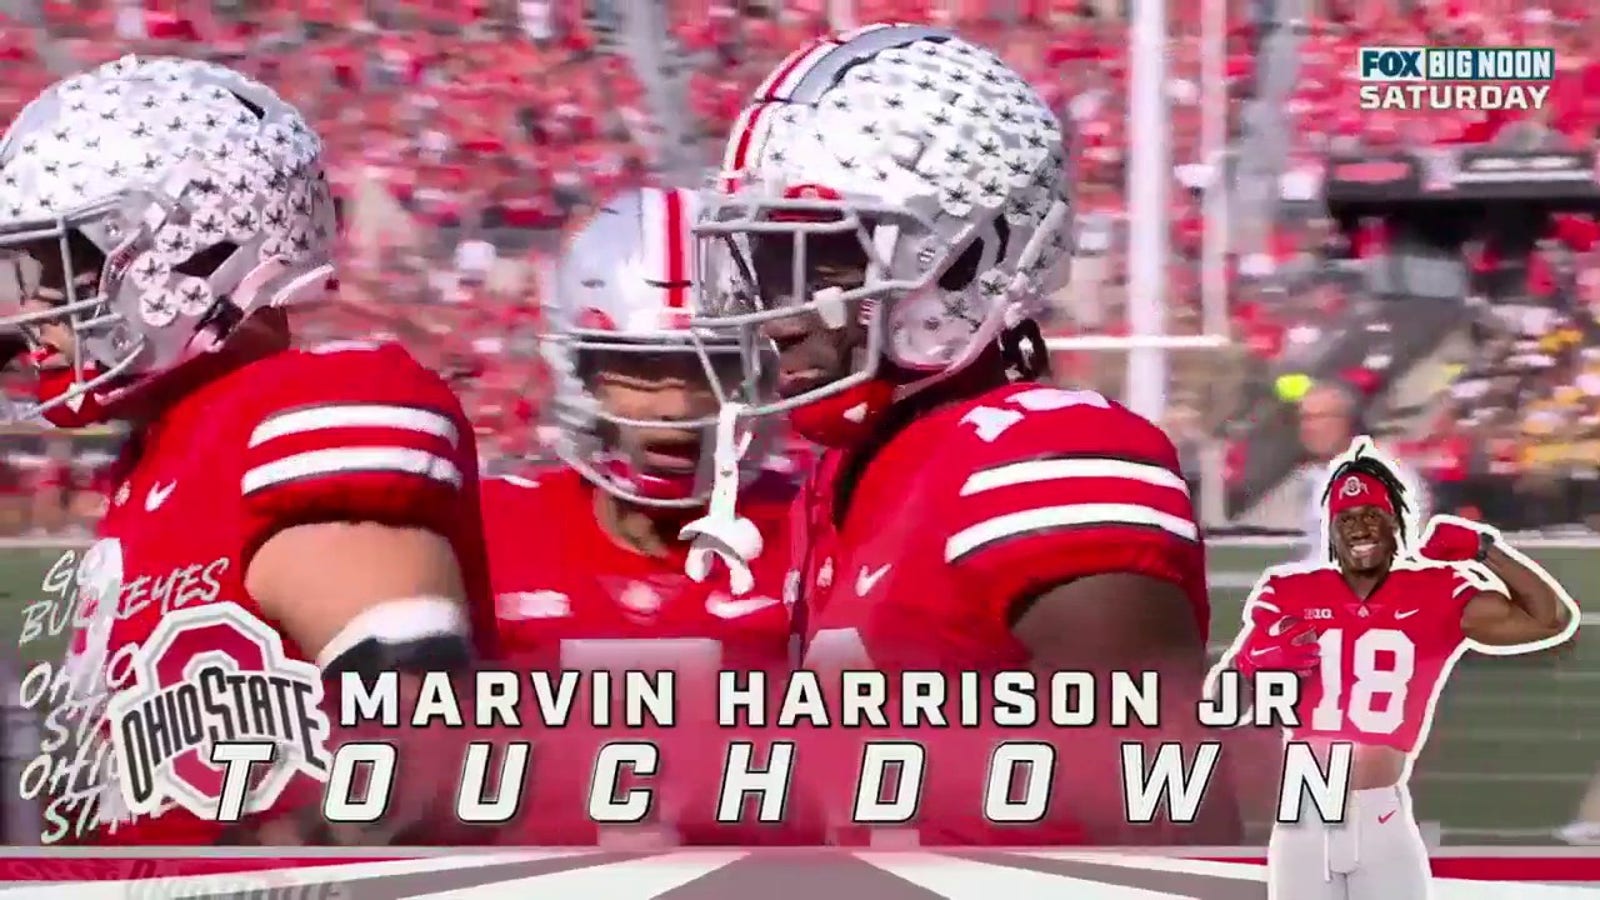 CJ Stroud connects with Marvin Harrison Jr.  for a 6-yard touchdown